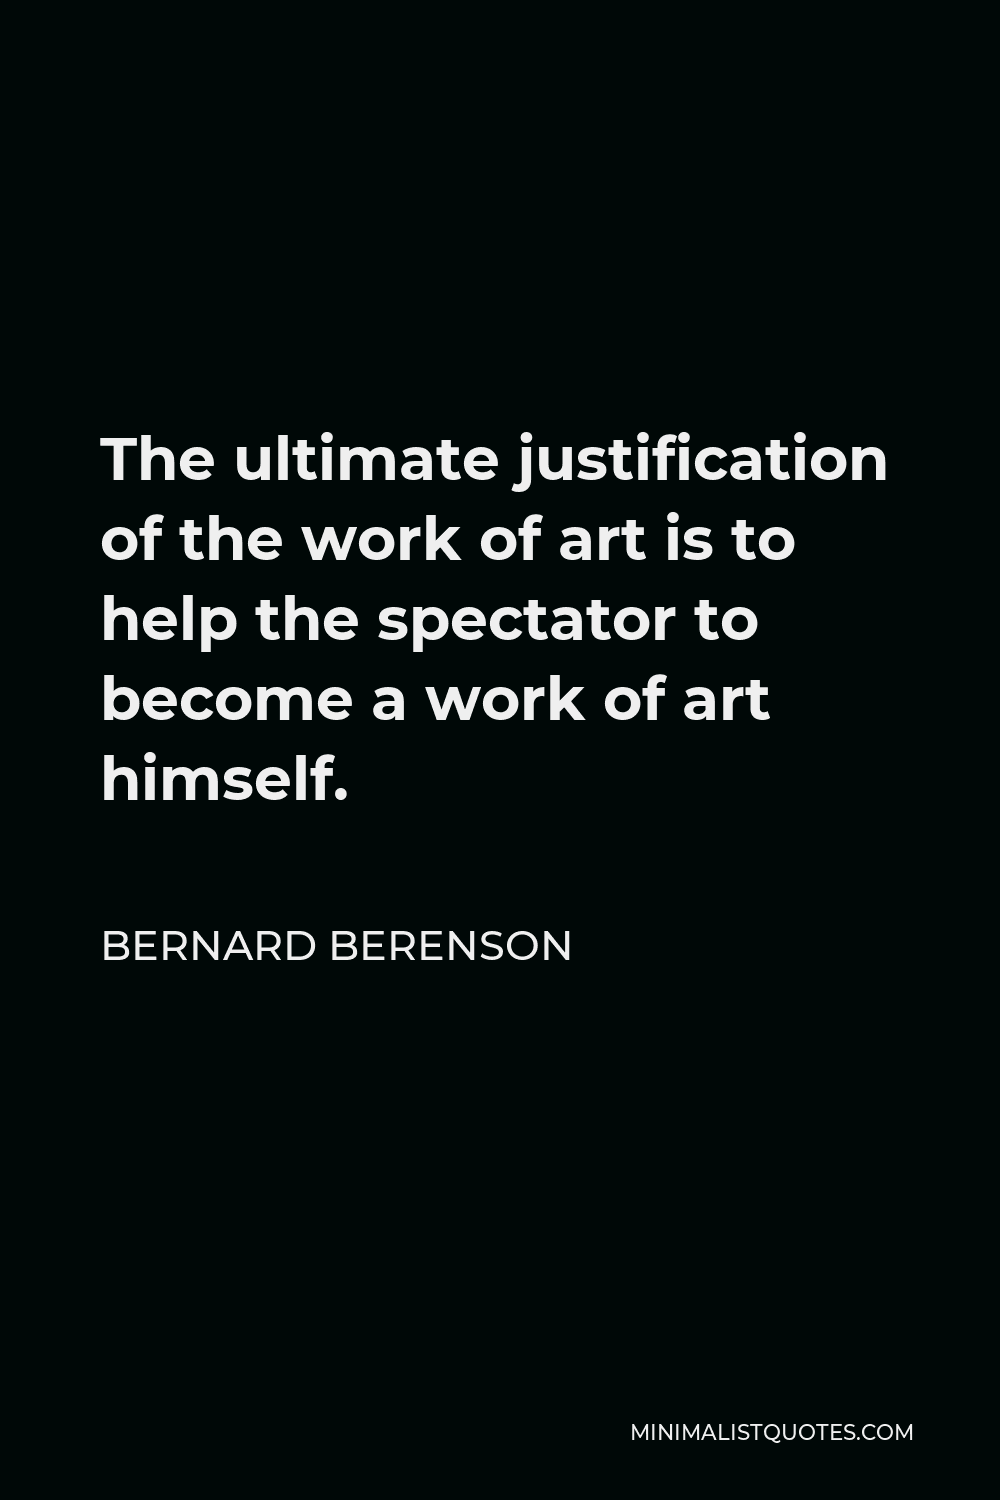 Bernard Berenson Quote - The ultimate justification of the work of art is to help the spectator to become a work of art himself.